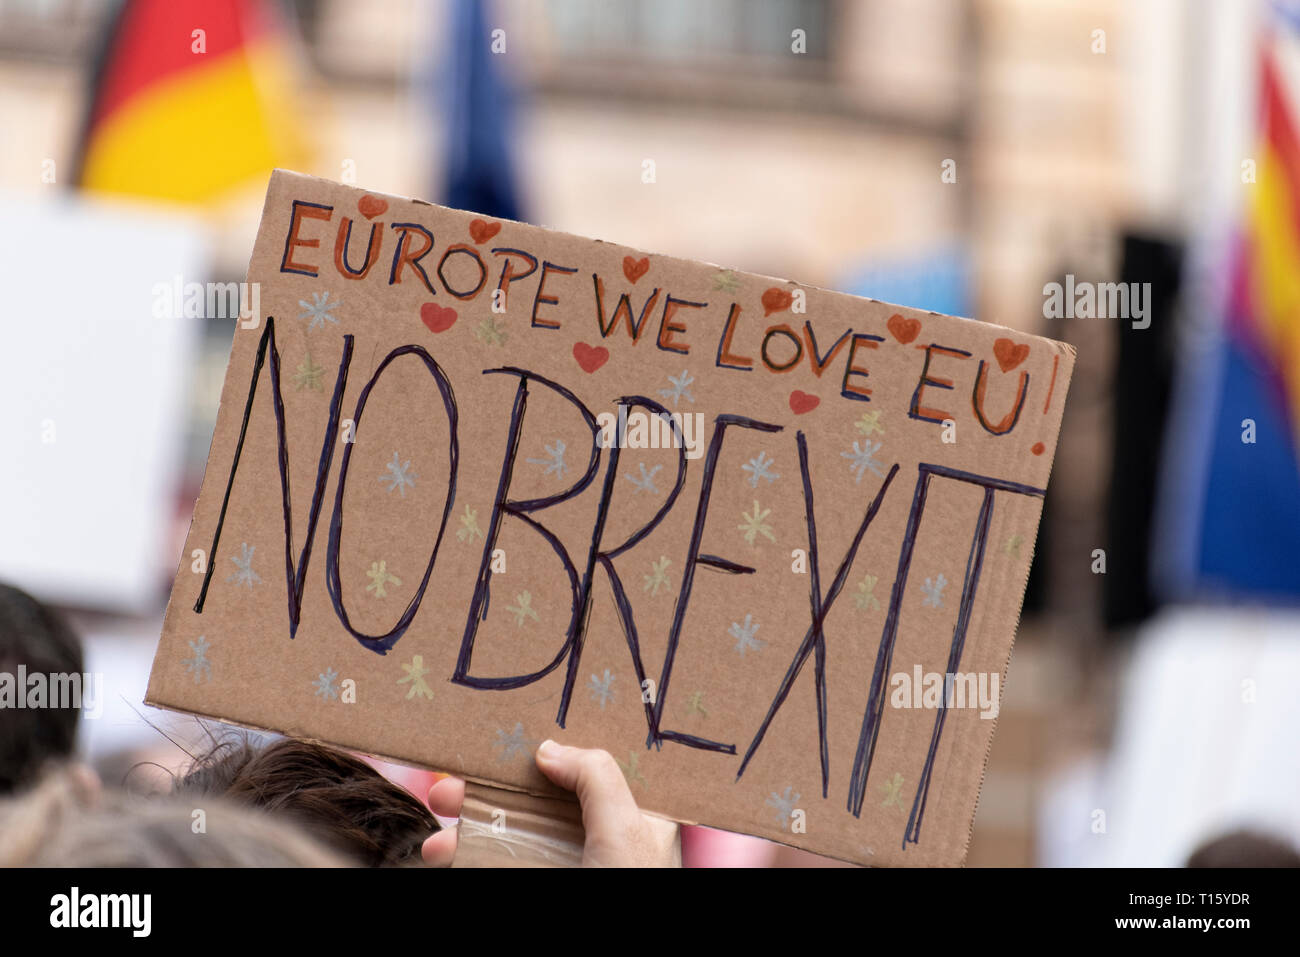 London, UK. 23rd Mar, 2019. Peoples Vote March, Europe we love EU placard. Crowd detail and banners as taken from the perspective of a protester. Remain banners, second referendum. Credit: Tony Pincham/Alamy Live News Stock Photo